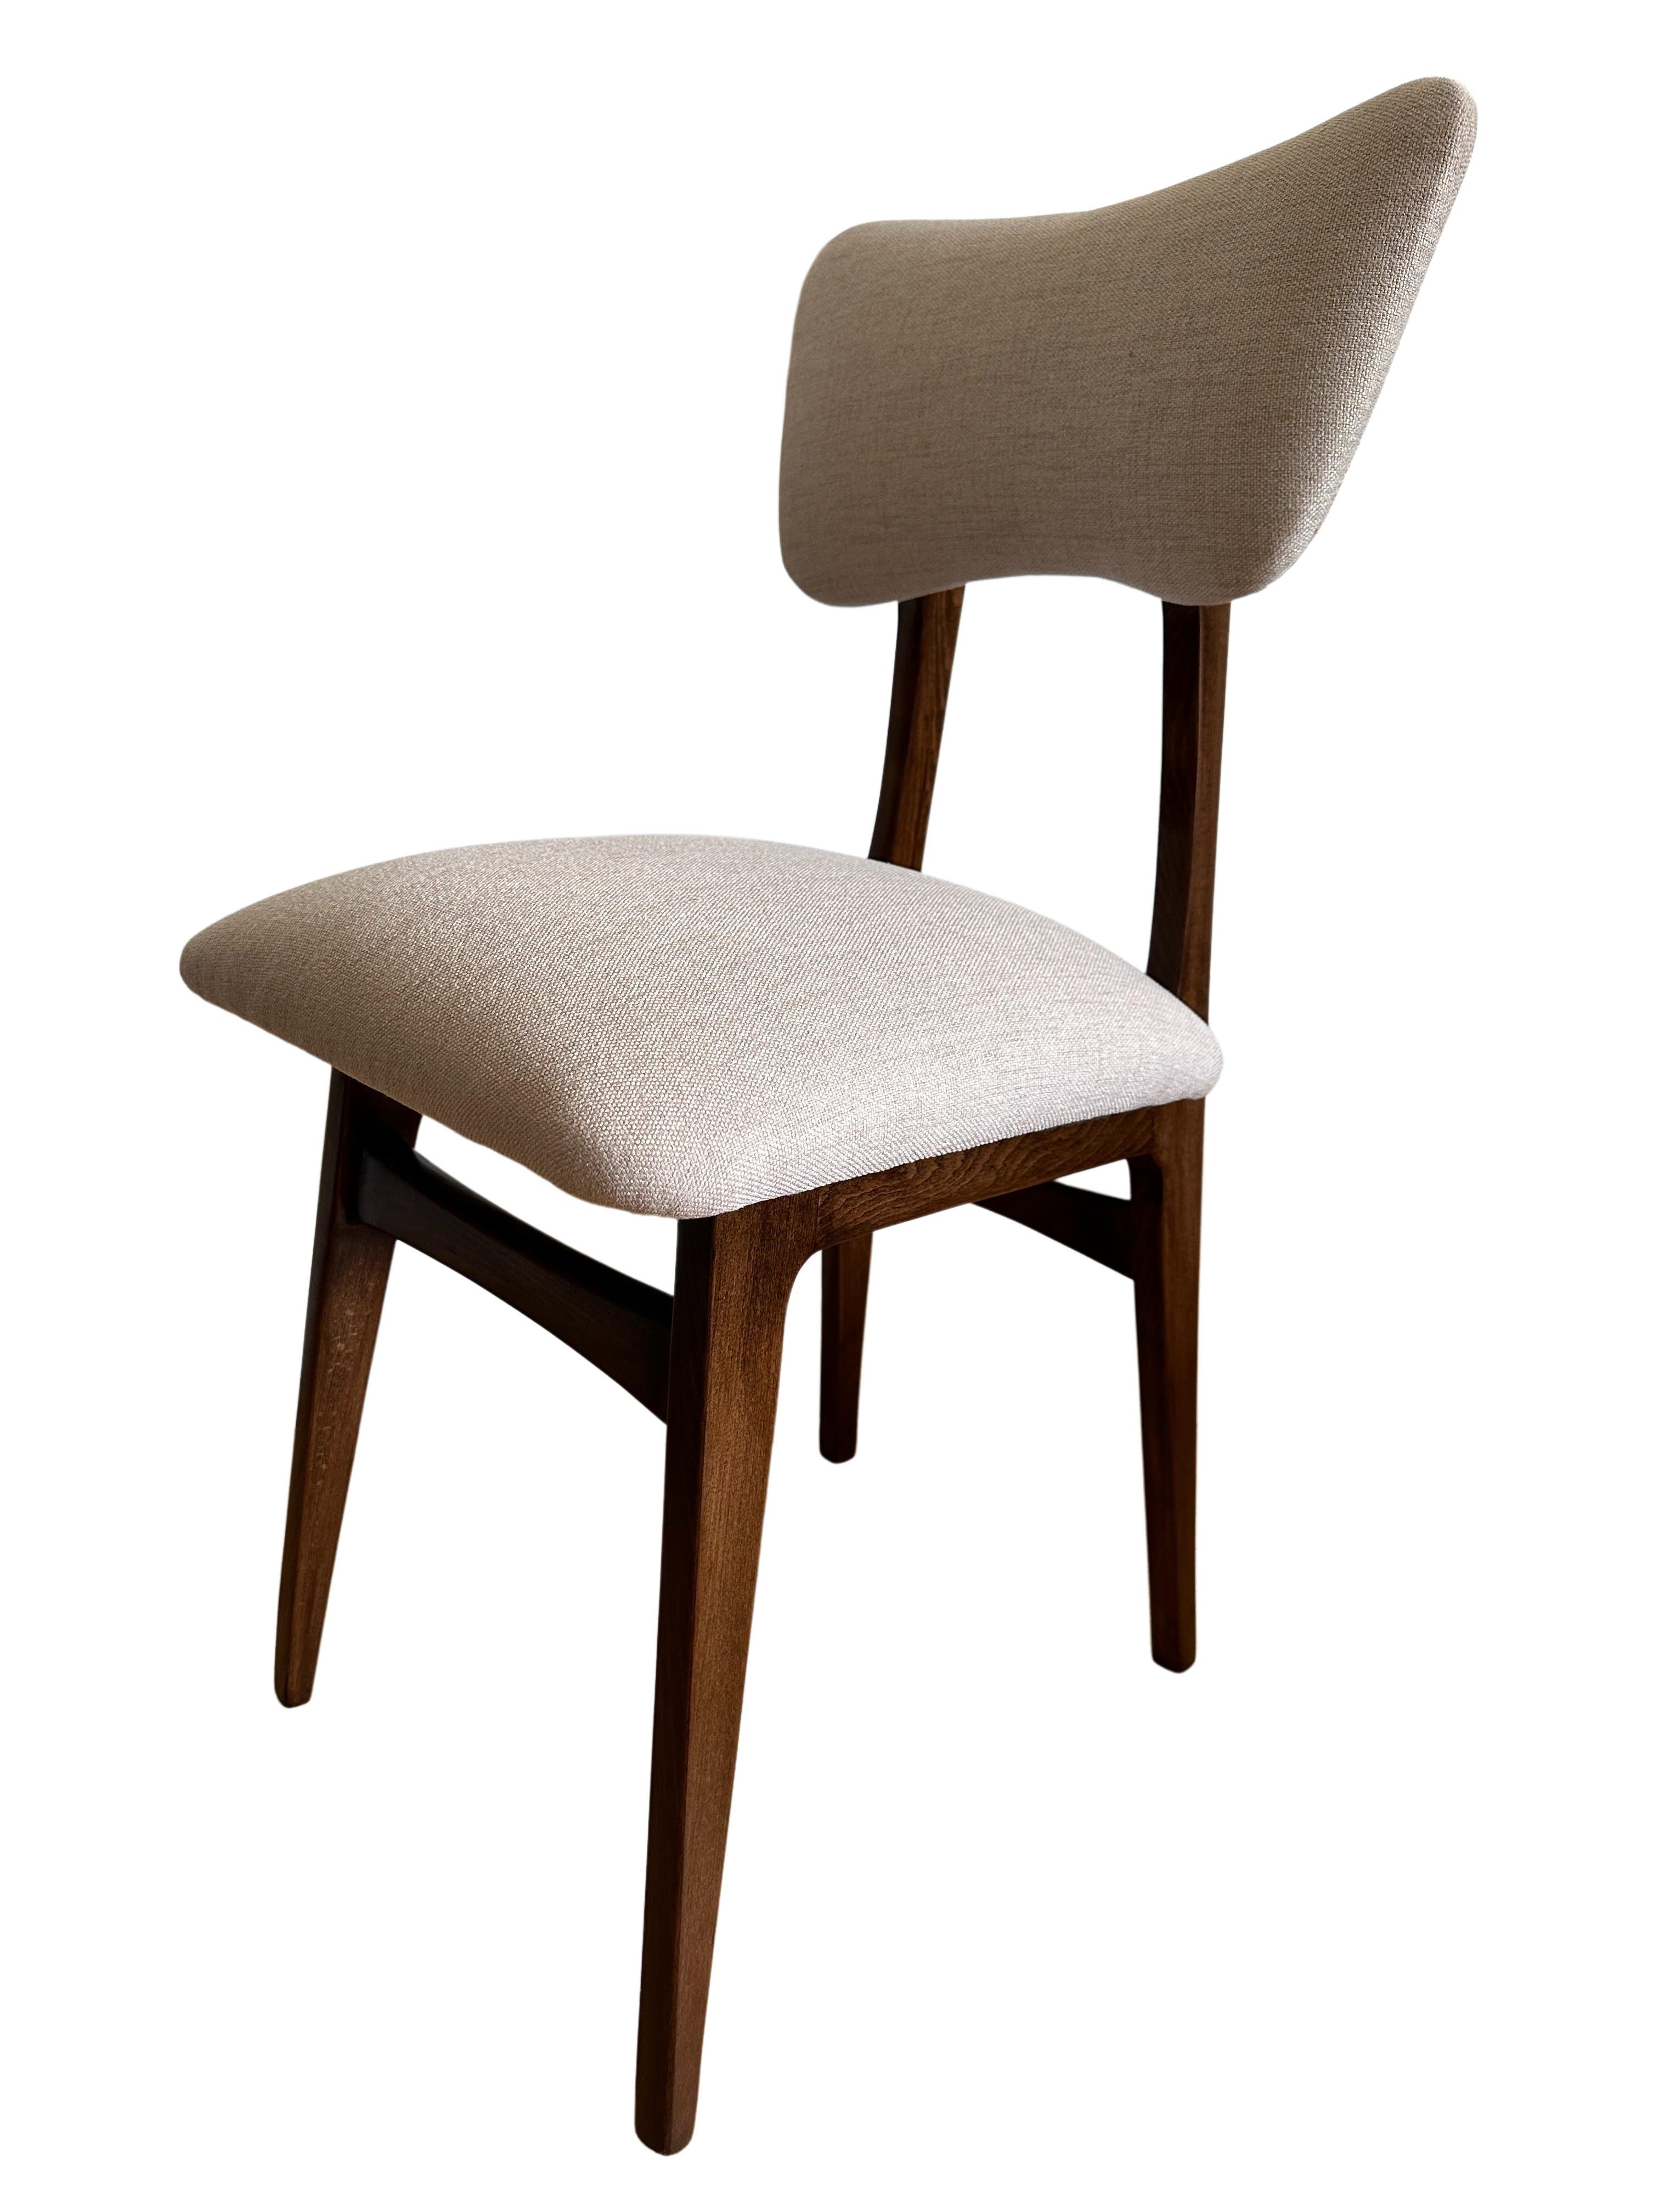 Mid-Century Modern Set of Two Midcentury Beige Dining Chairs, Europe, 1960s For Sale